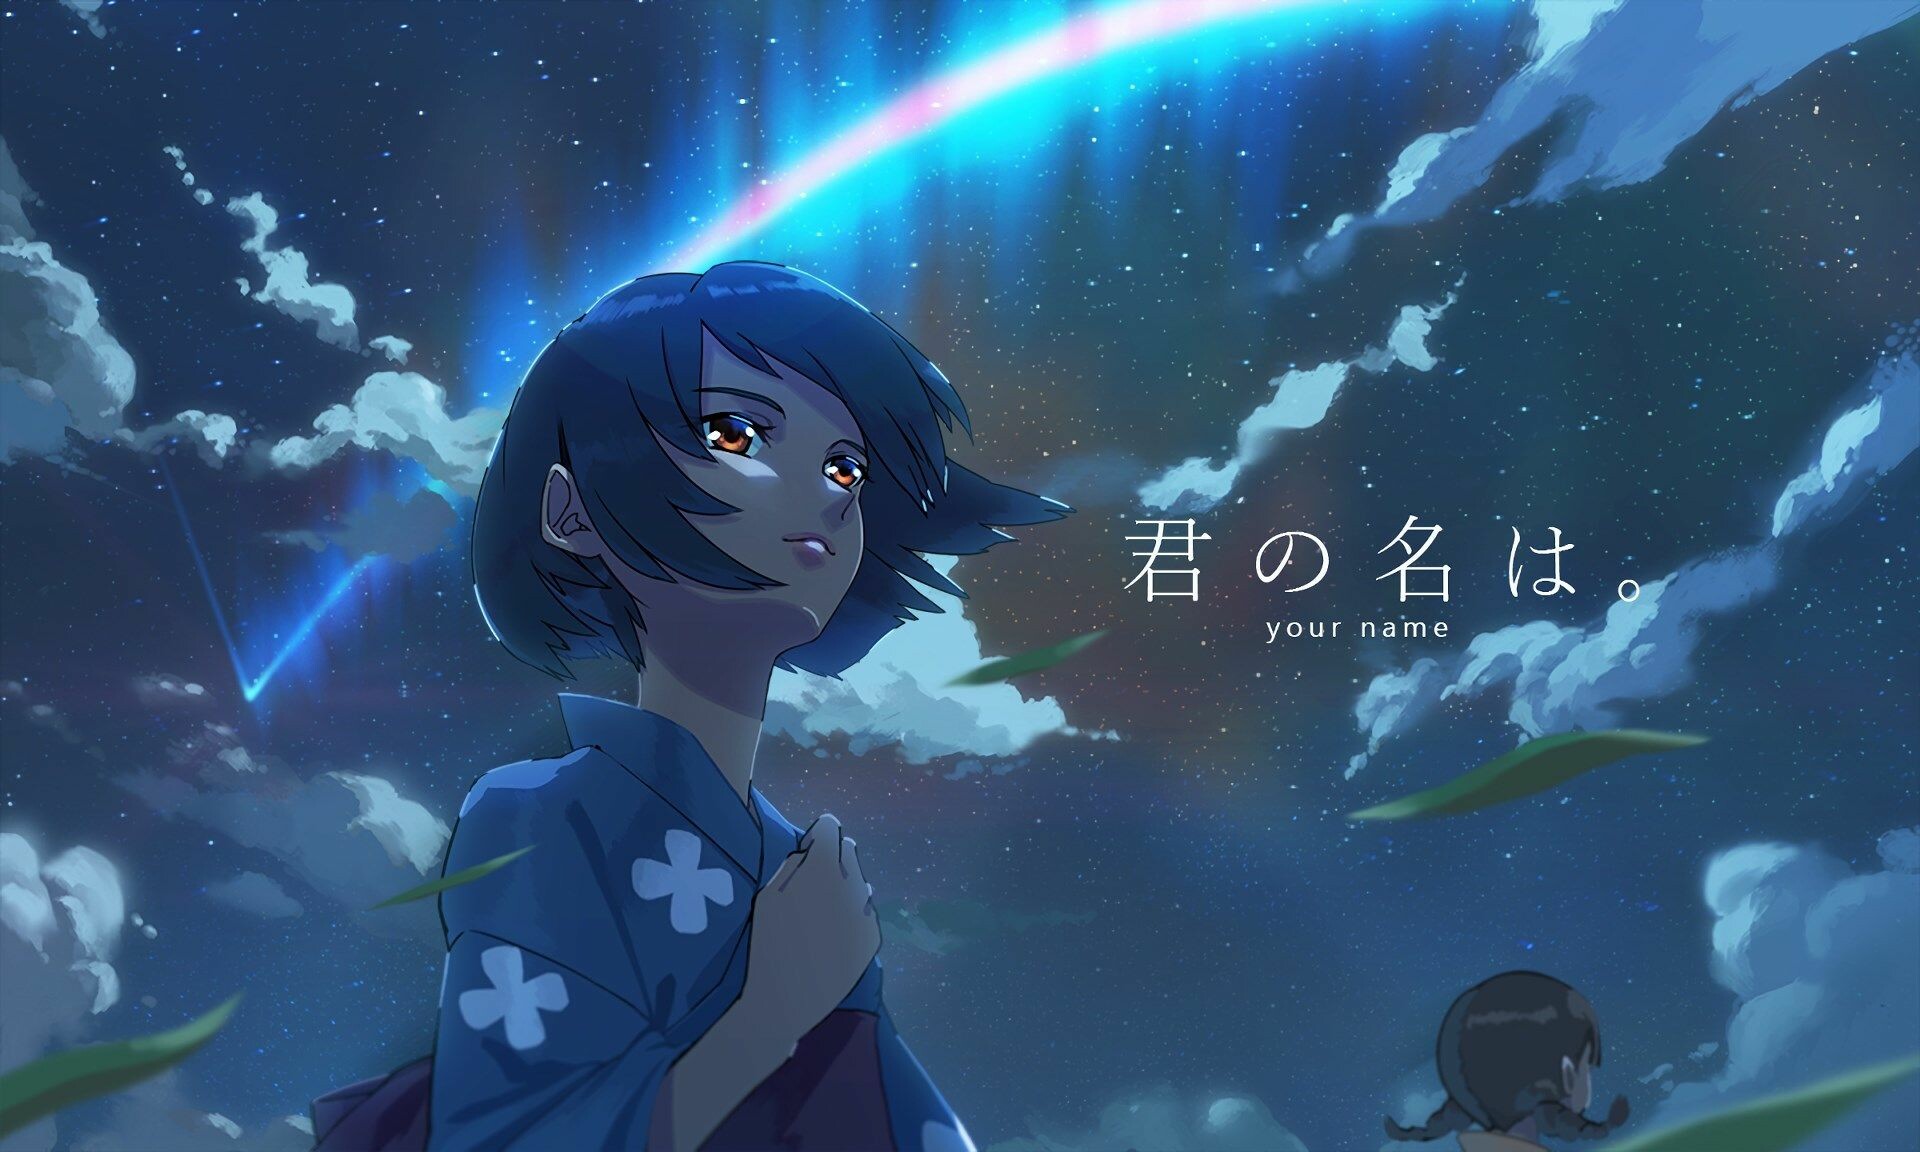 50 Your Name Anime Wallpapers Hd 4k 5k For Pc And Mobile Download Free Images For Iphone Android